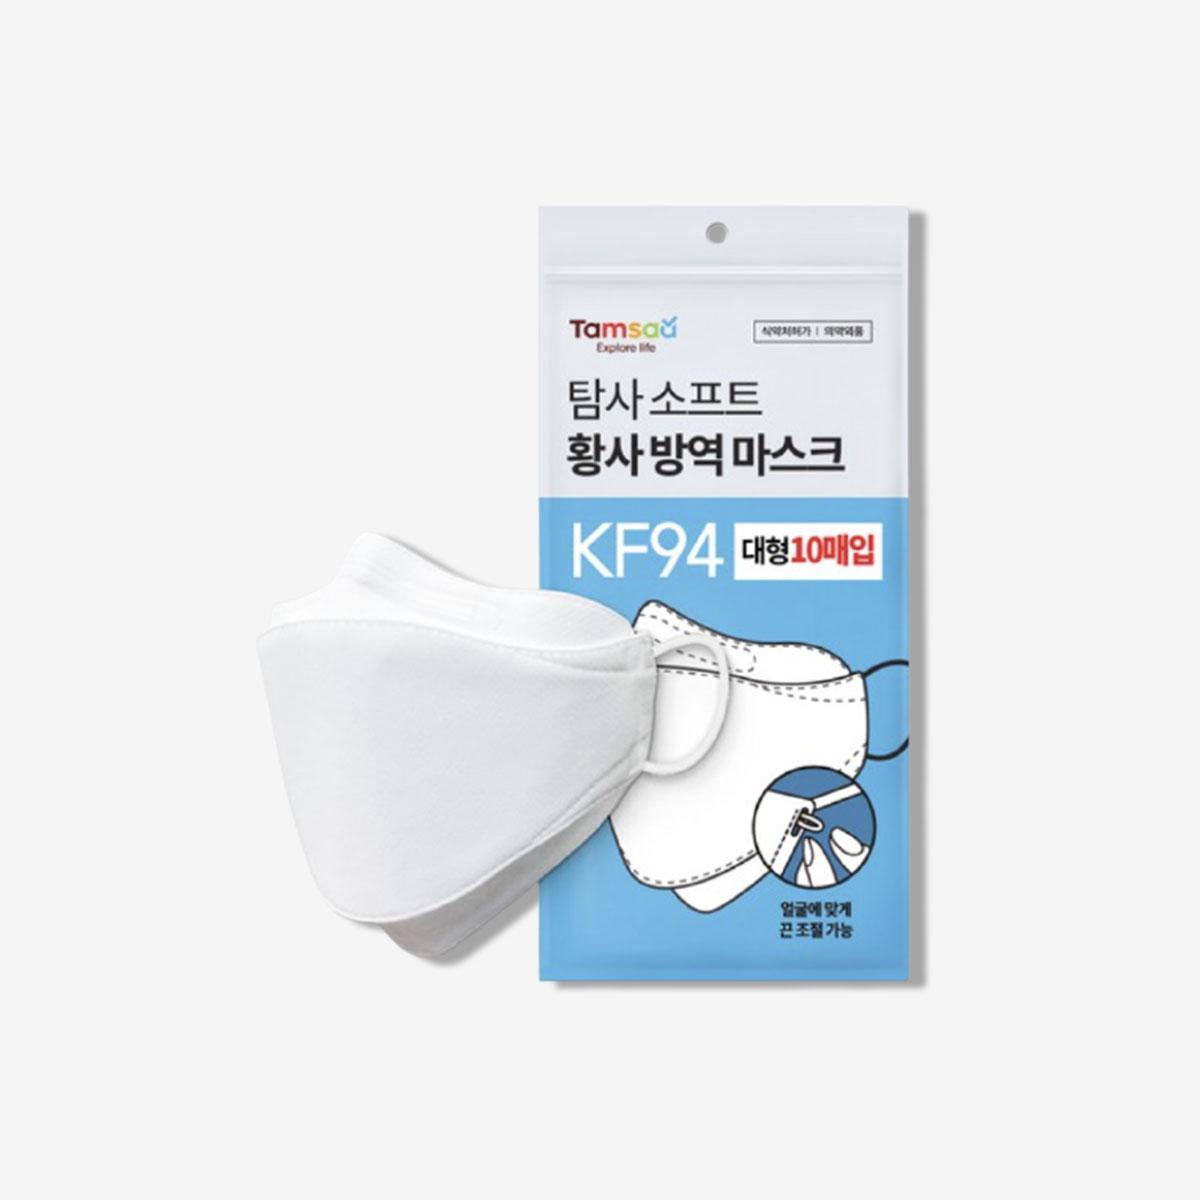 Yellow Dust Prevention Mask KF94 Slim Fit (White)